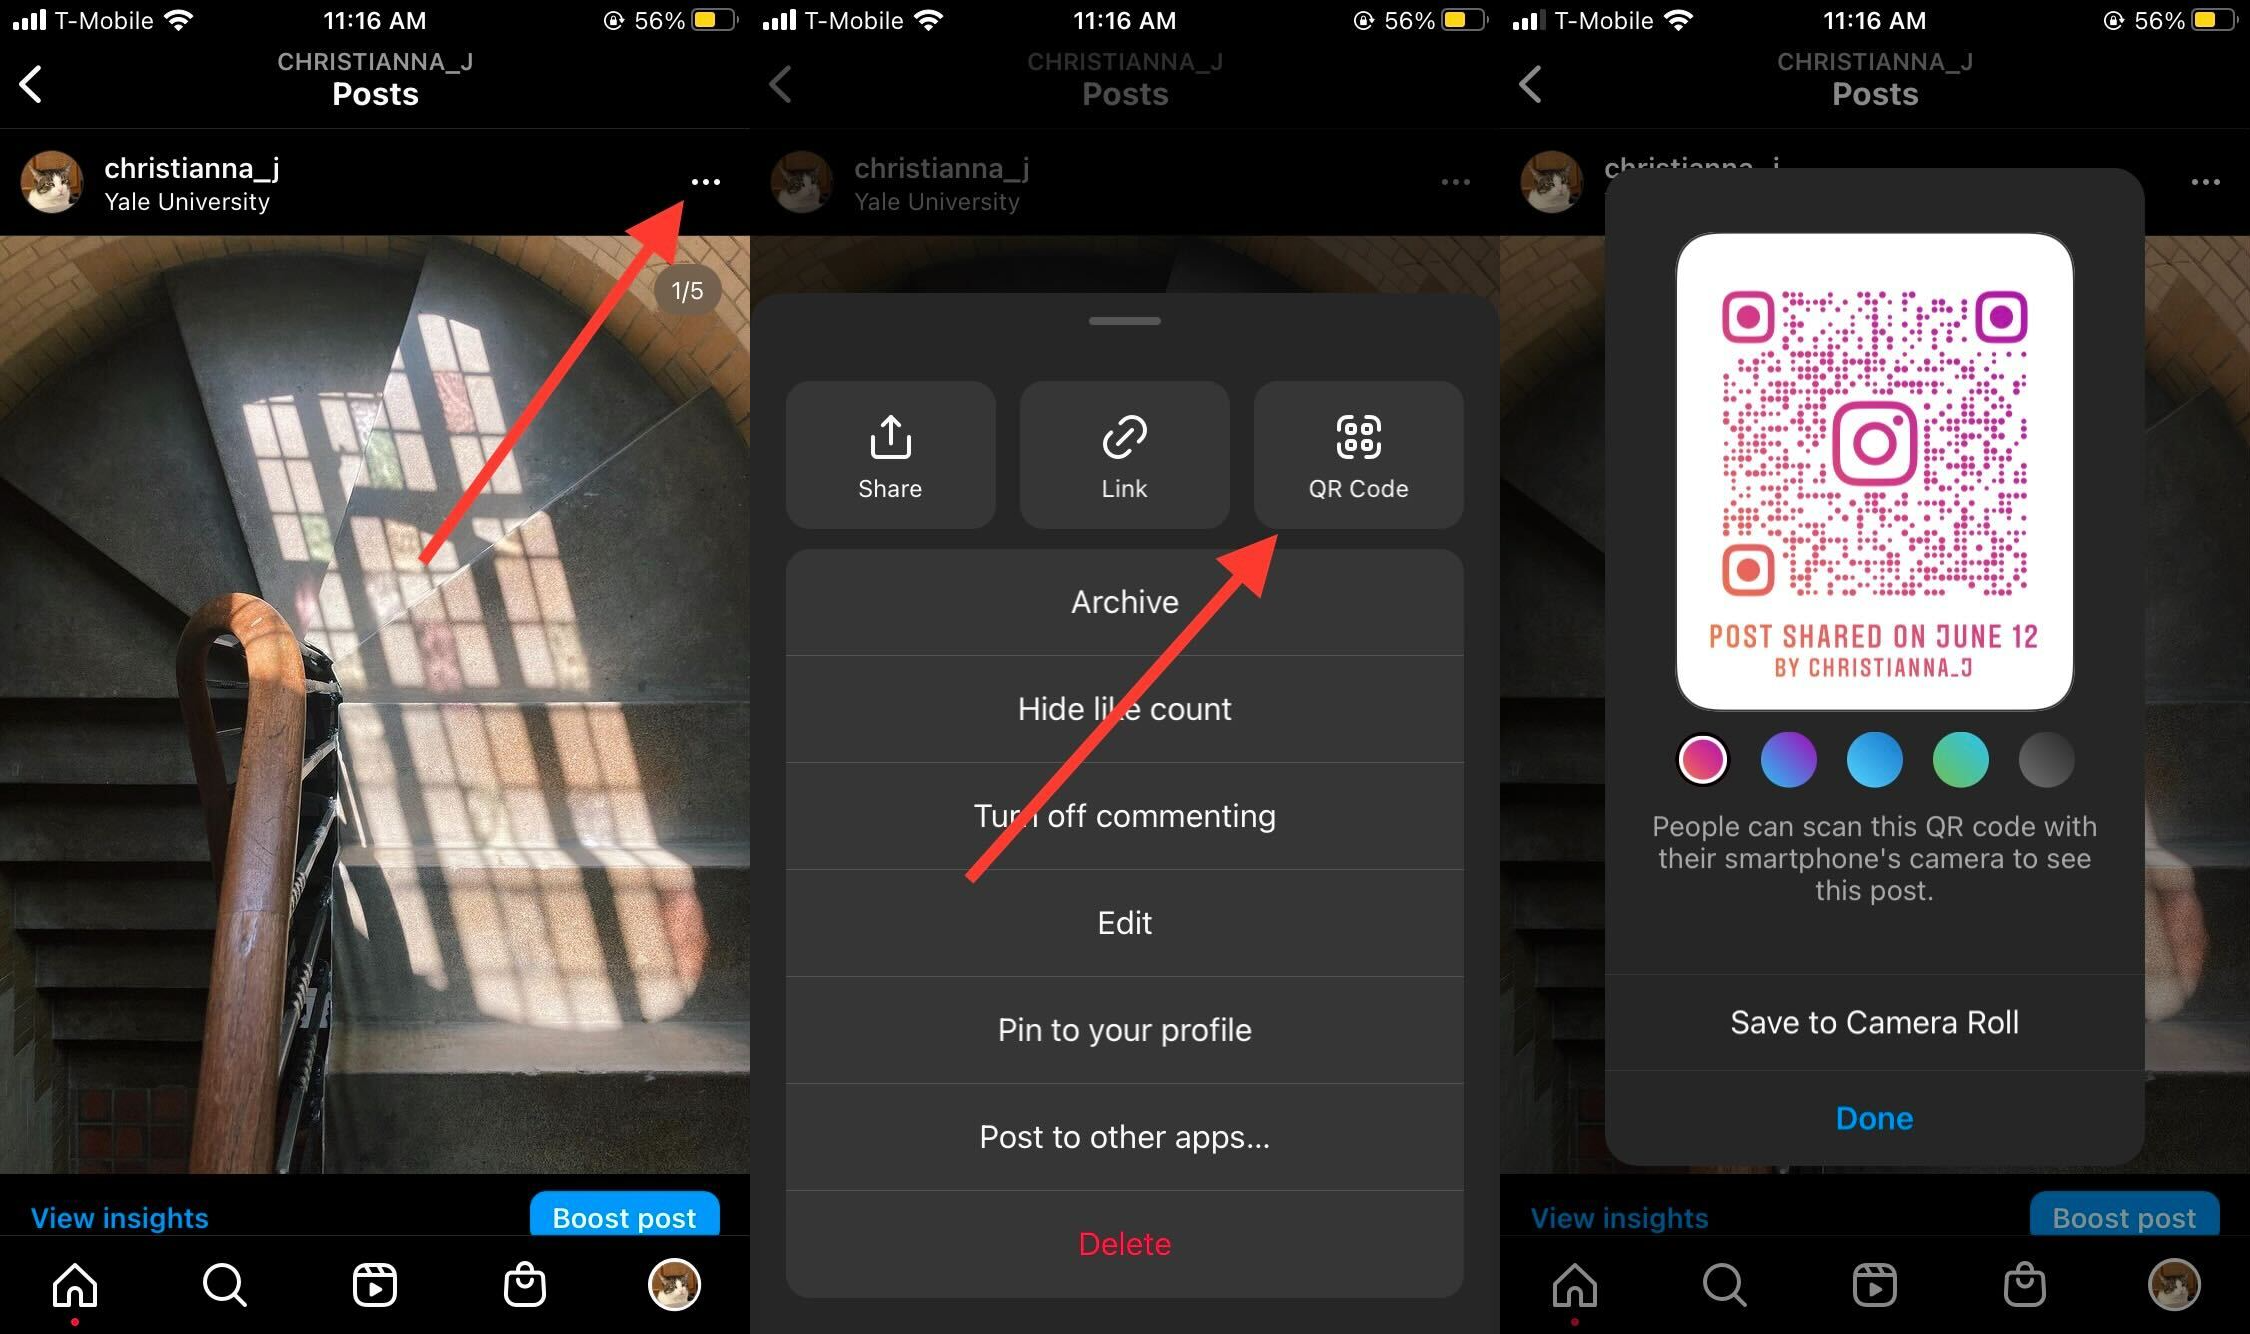 How to get a QR code on Instagram